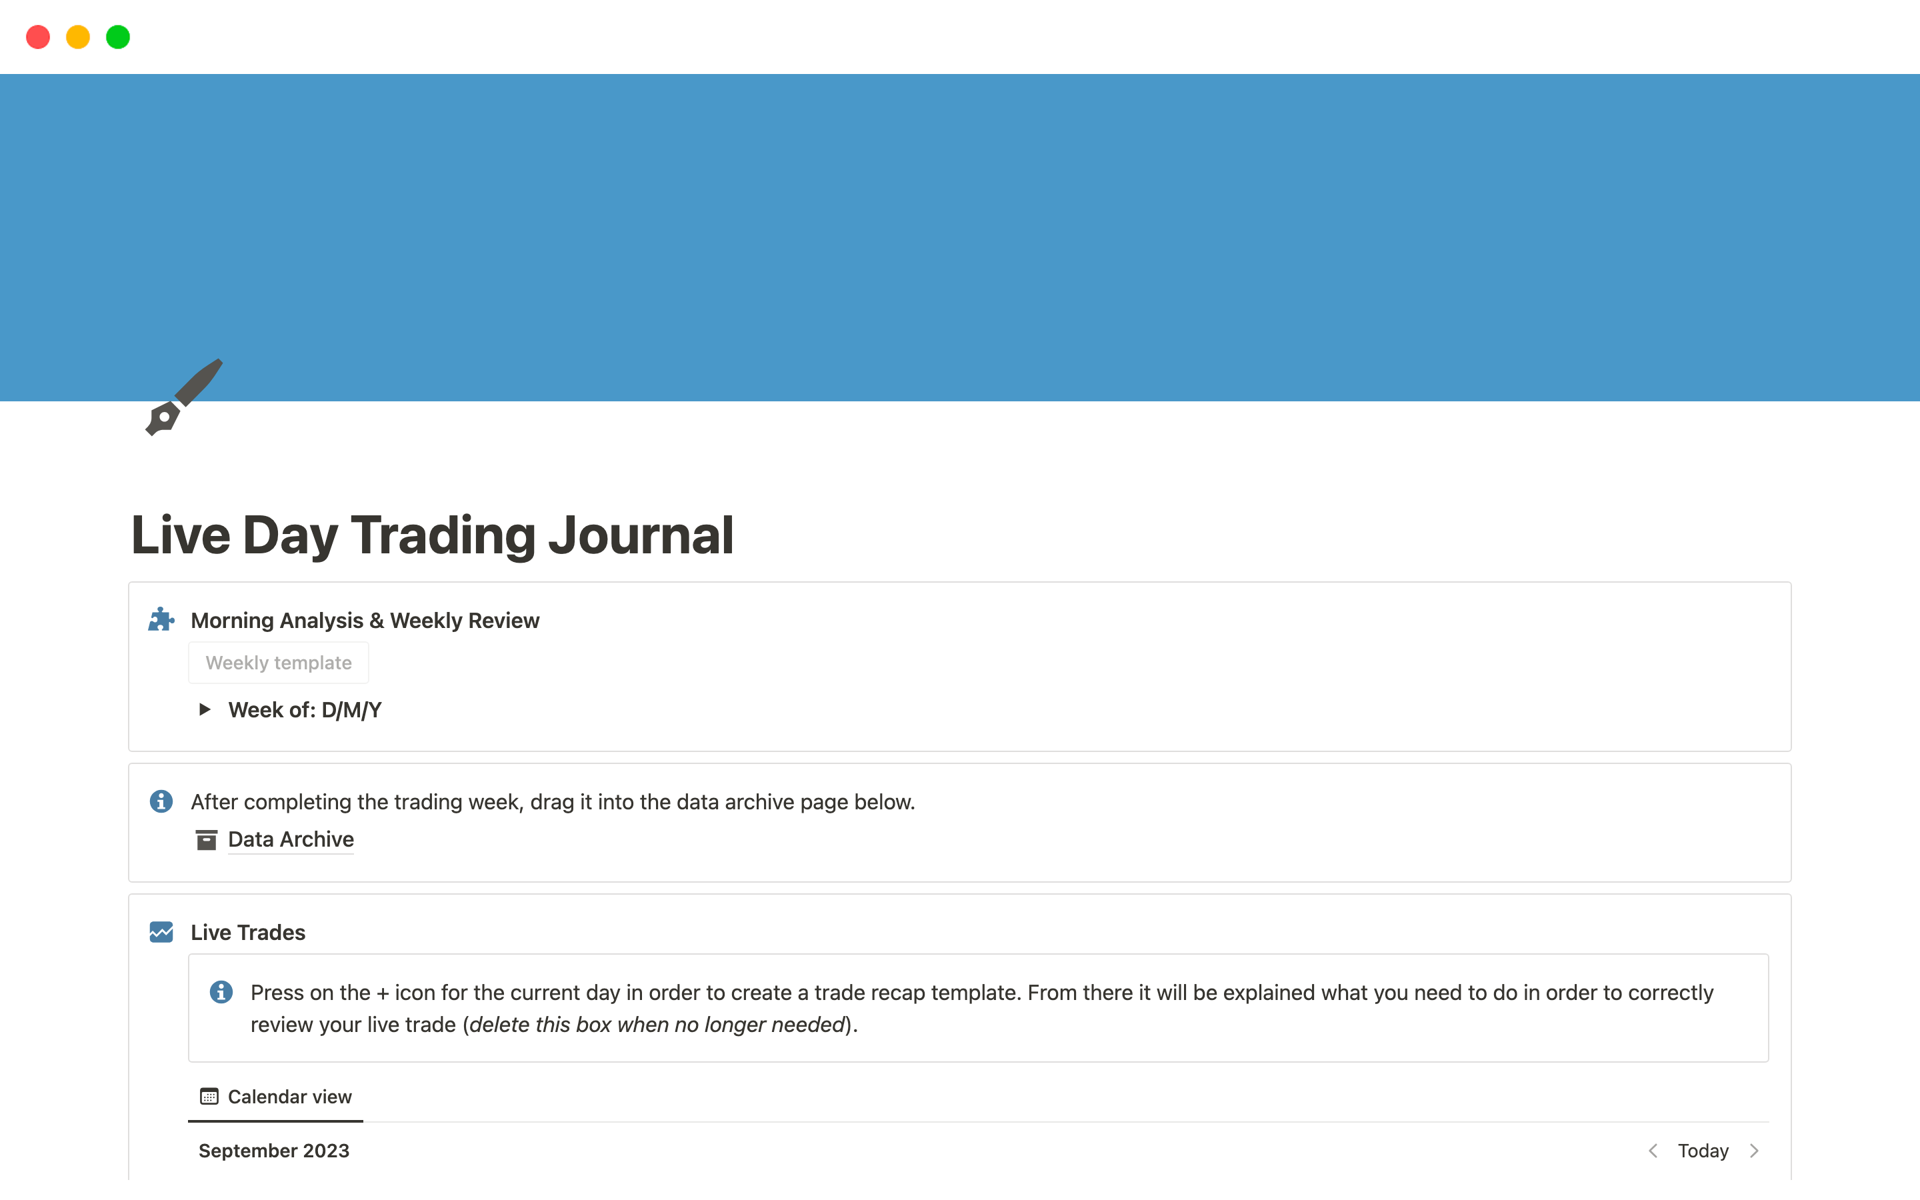 Live day trading journal for forex traders.